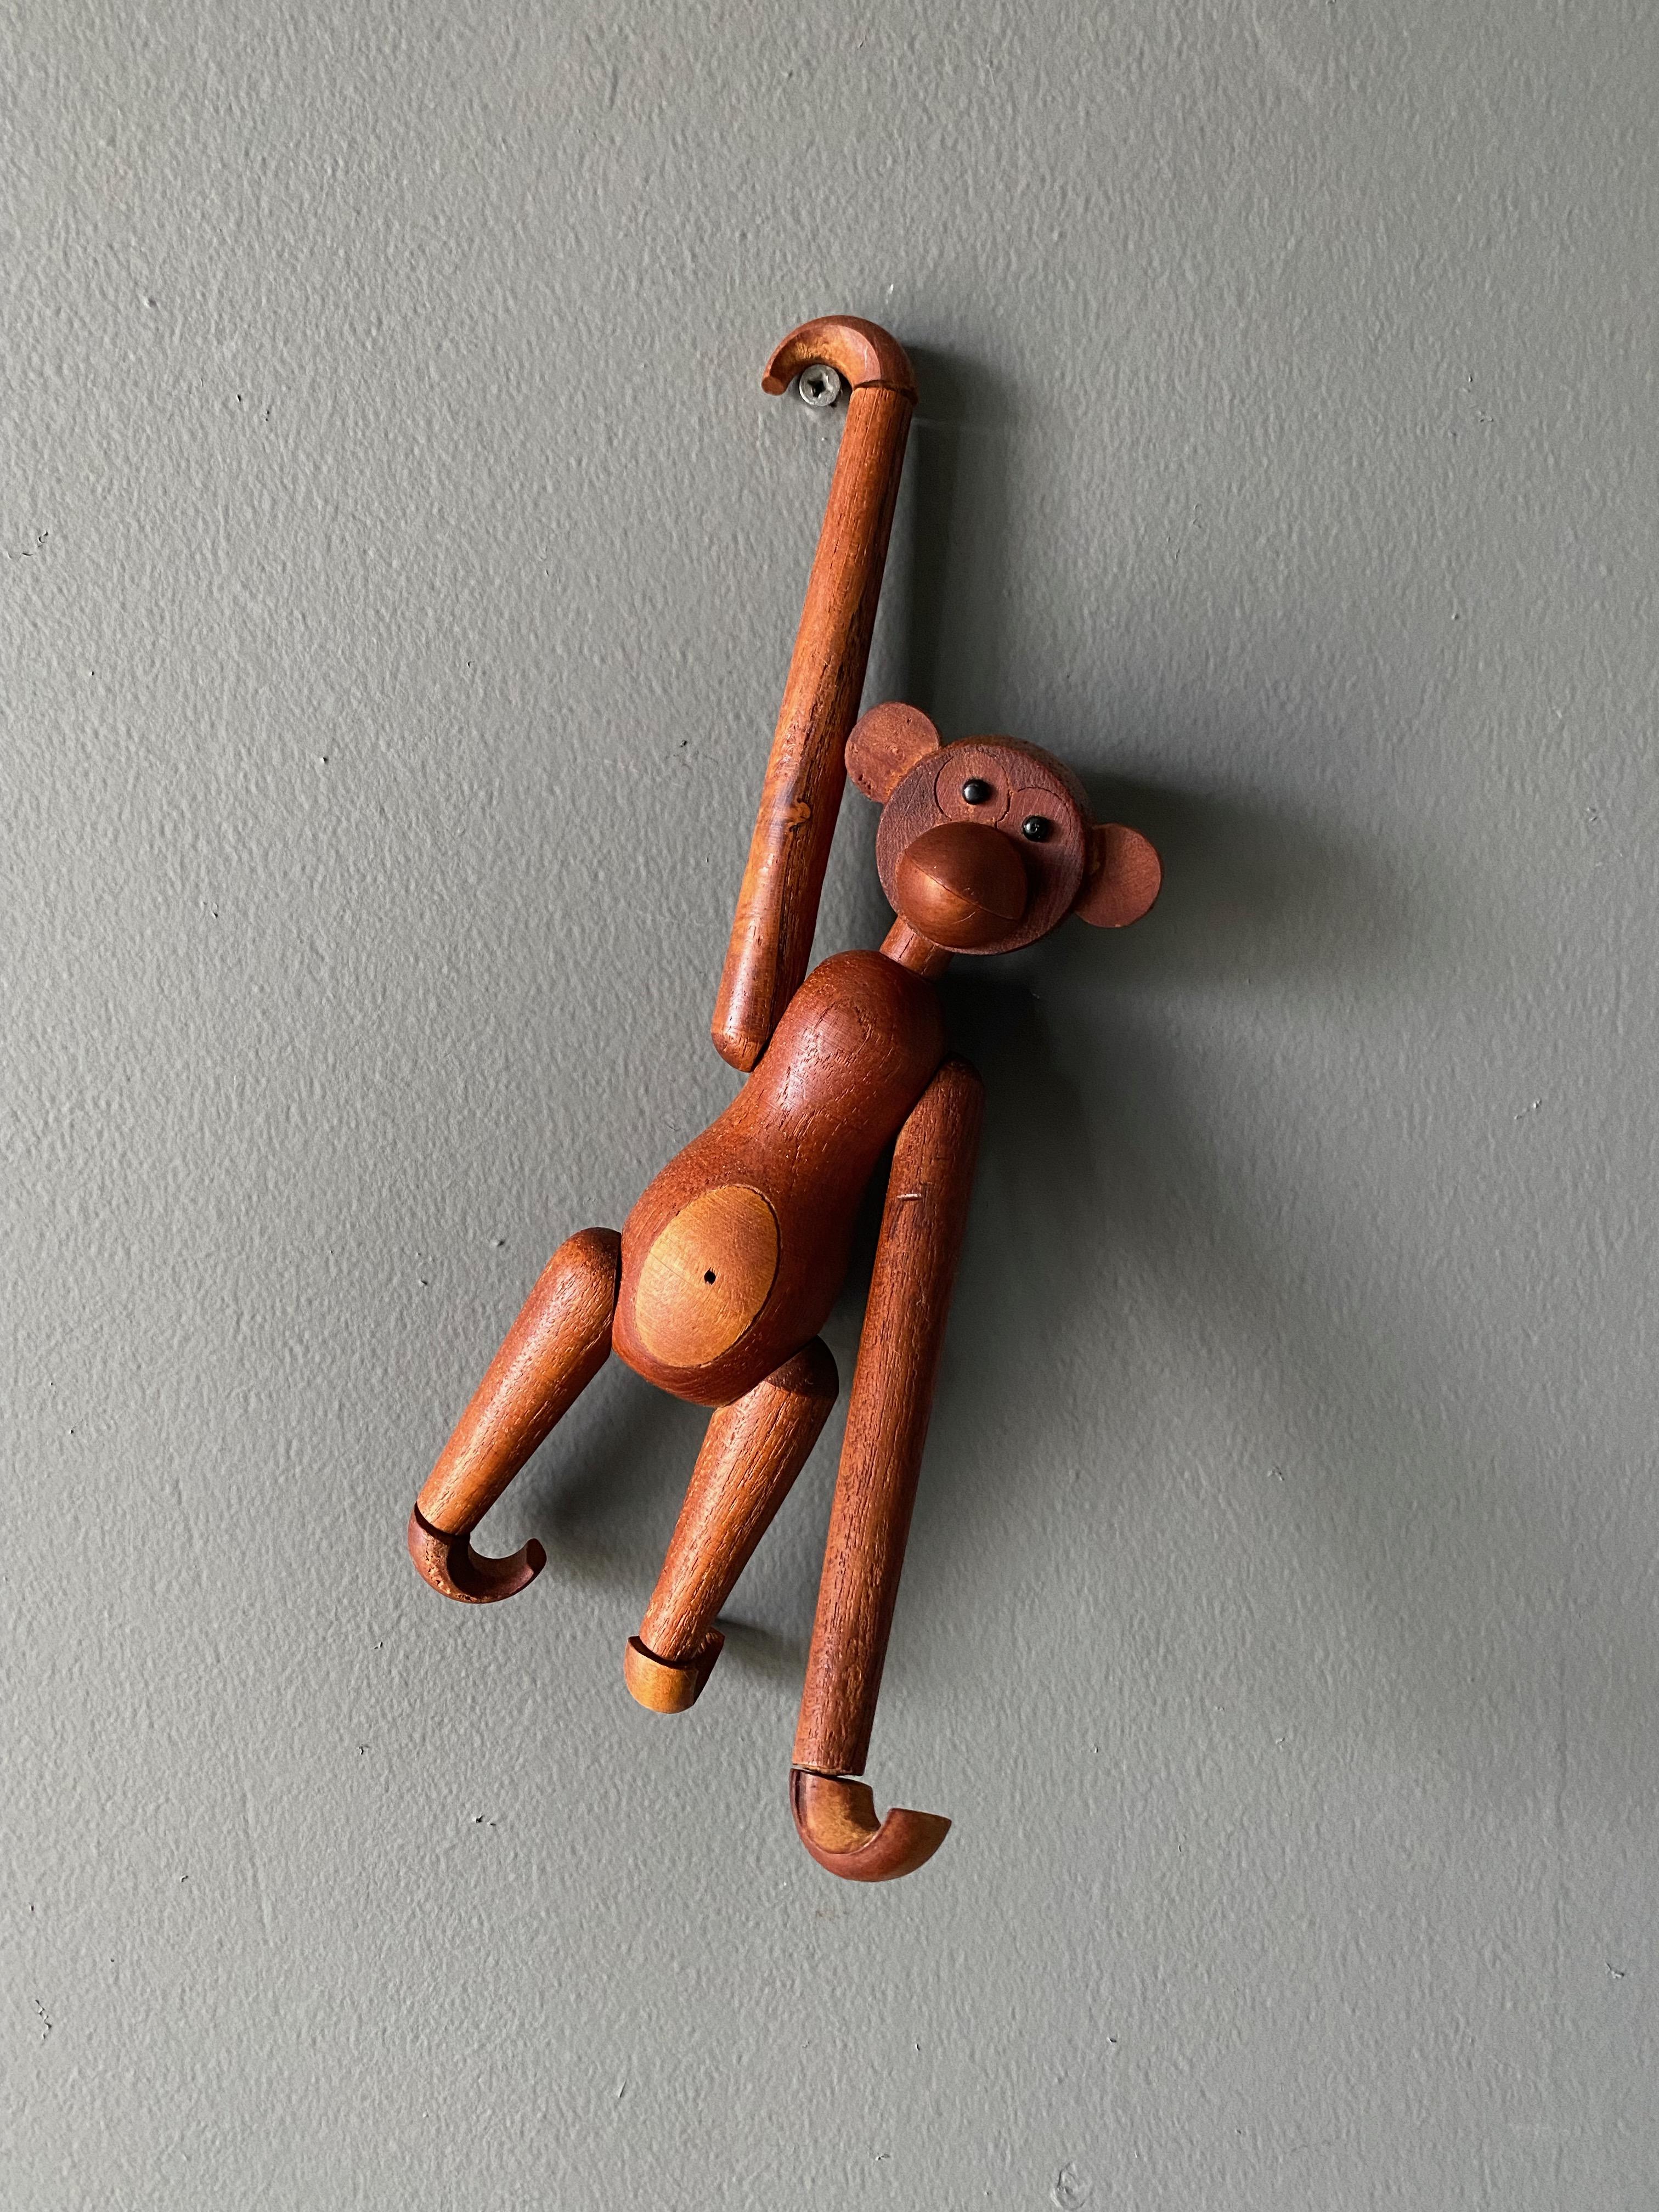 Articulated Teak Monkey in the Style of Kay Bojesen, circa 1960s 6